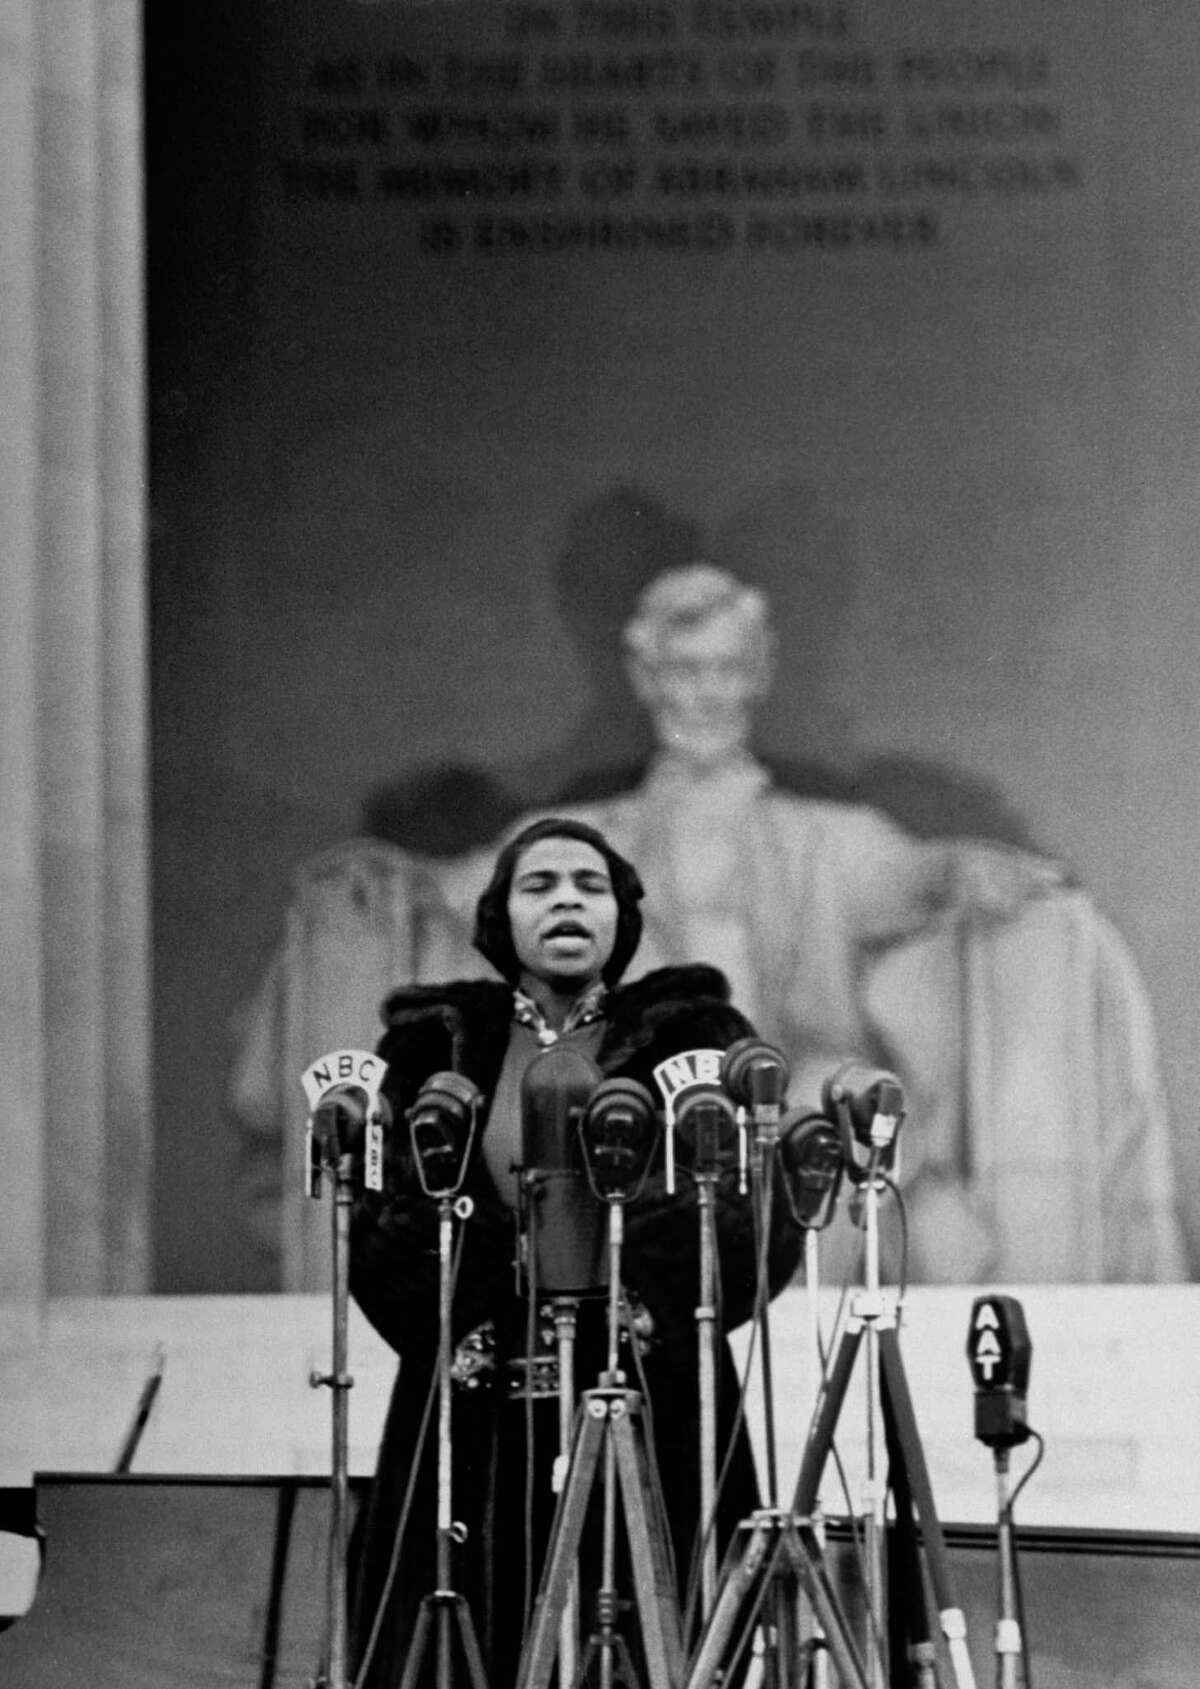 Singer Marian Anderson, denied use of a DAR (Daughters of the American Revolution) hall because of her race, gives an Easter concert at the Lincoln Memorial. Western Connecticut State University will celebrate the 80th anniversary of the historic concert with a special free, open-to-the-public Marian Anderson Tribute Concert Tuesday, April 9,at 8 p.m.,featuring WCSU vocal students performing songs by four of the leading African American female composers of the 20th century.